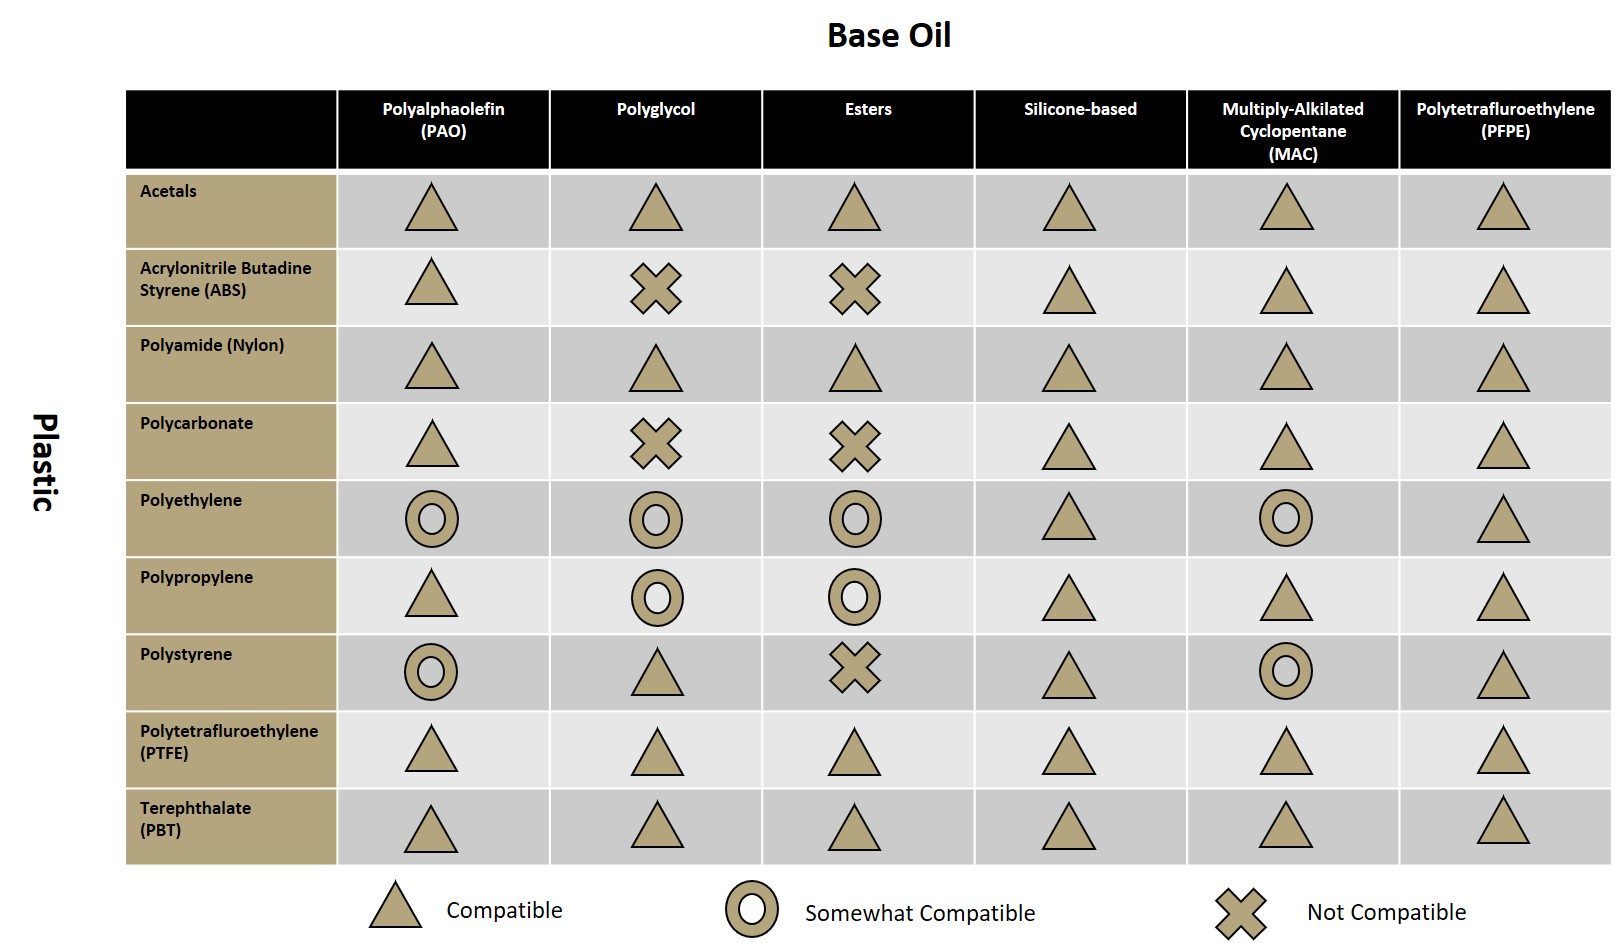 Laser Plastic Welding Material Compatibility Chart